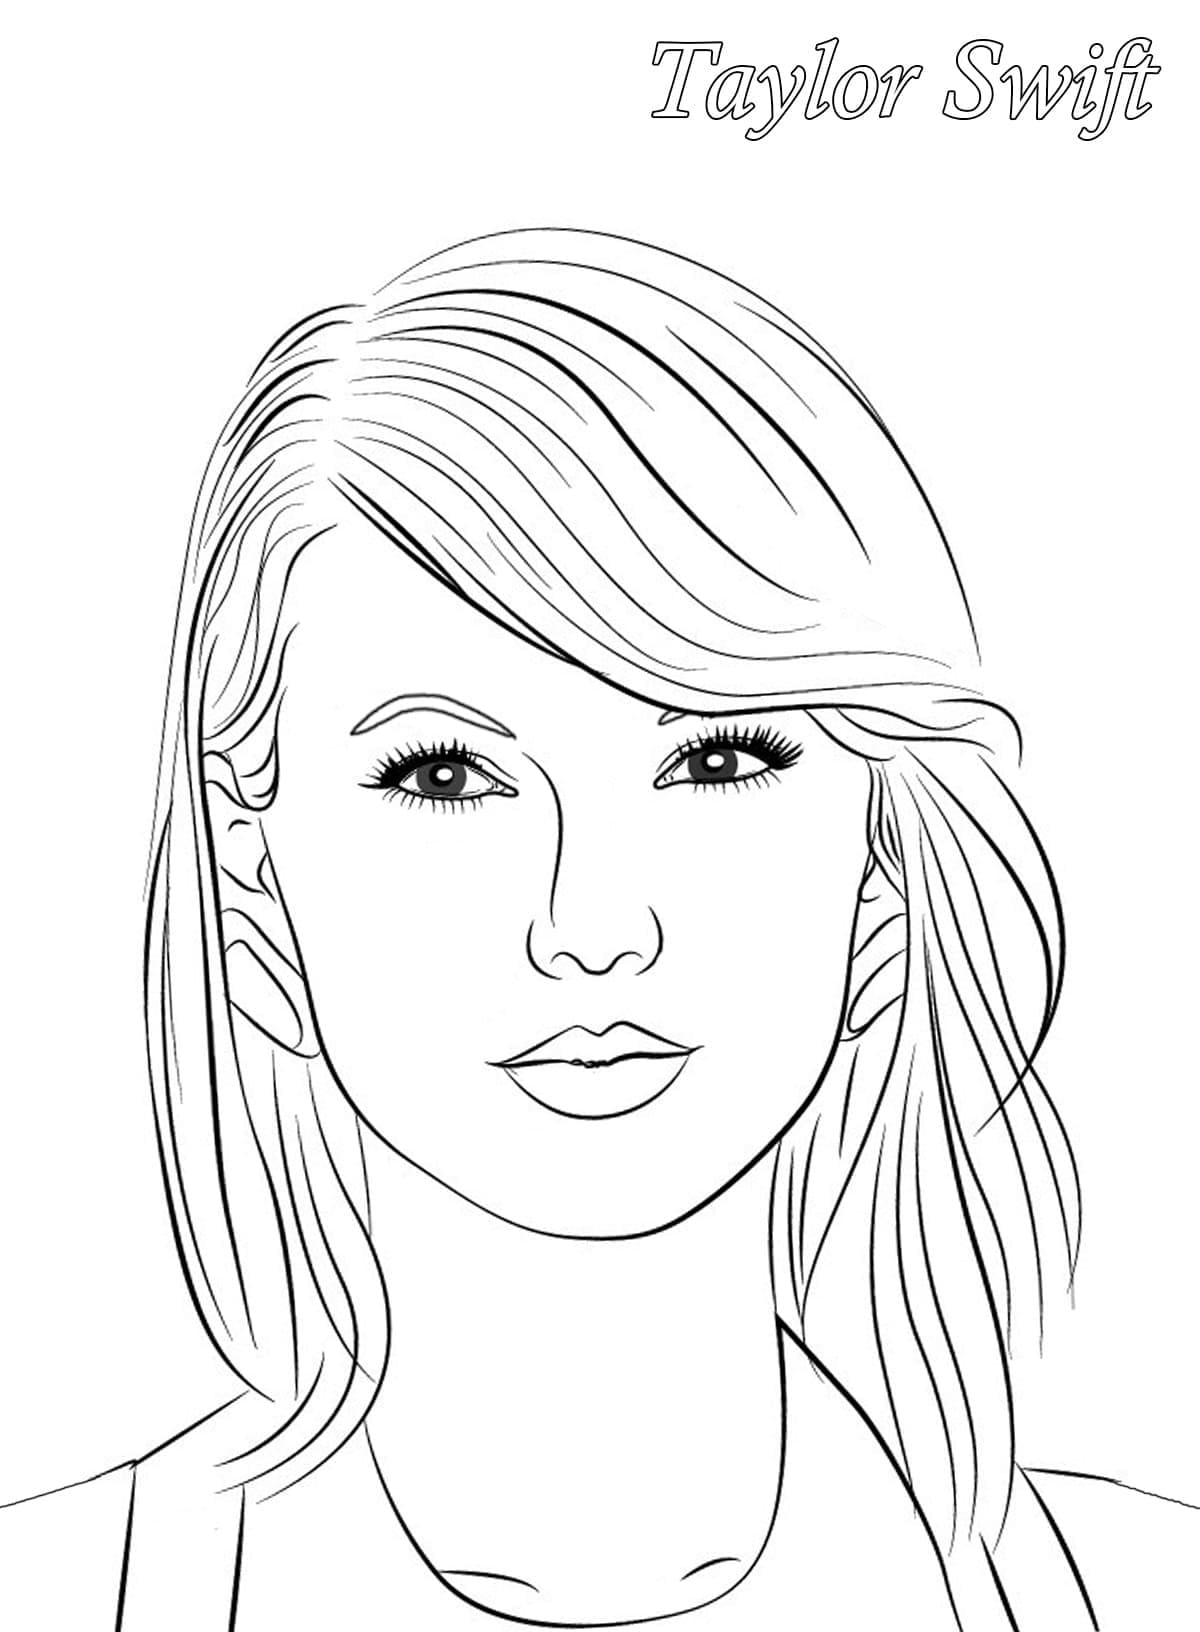 Coloring pages of taylor swift on Craiyon